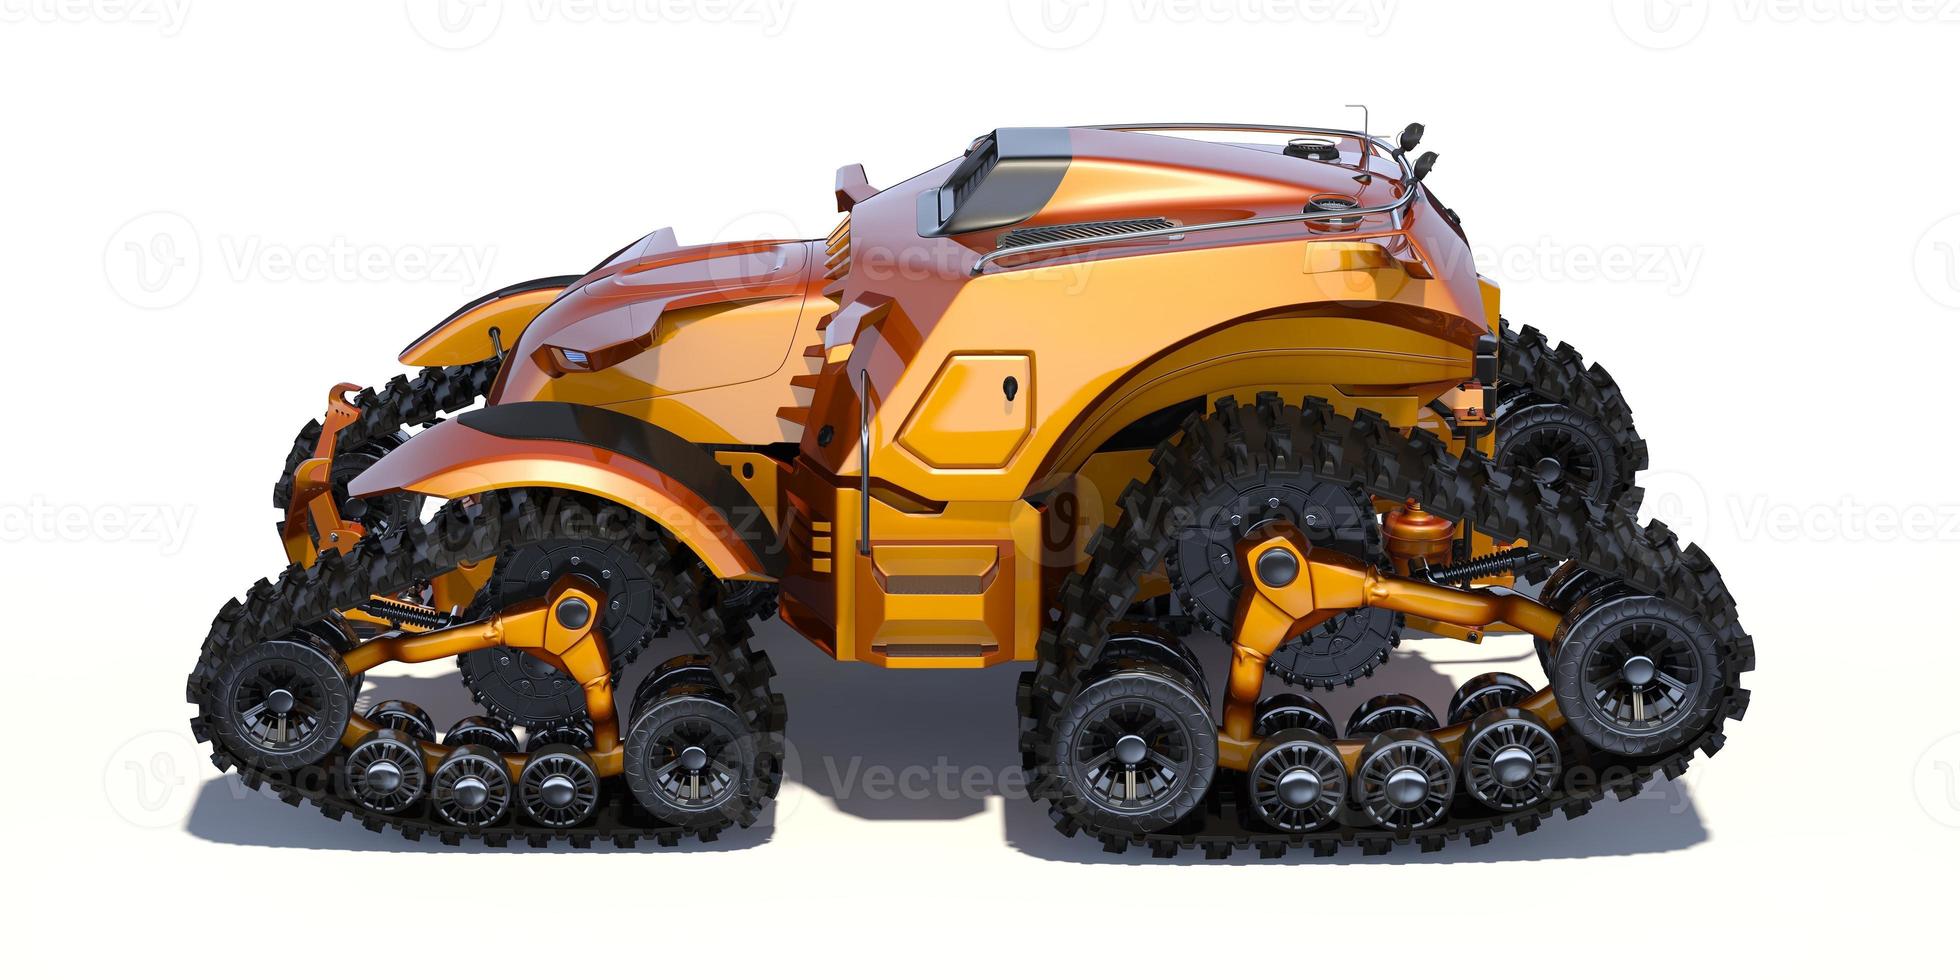 Brand-less generic self driving tractor concept photo